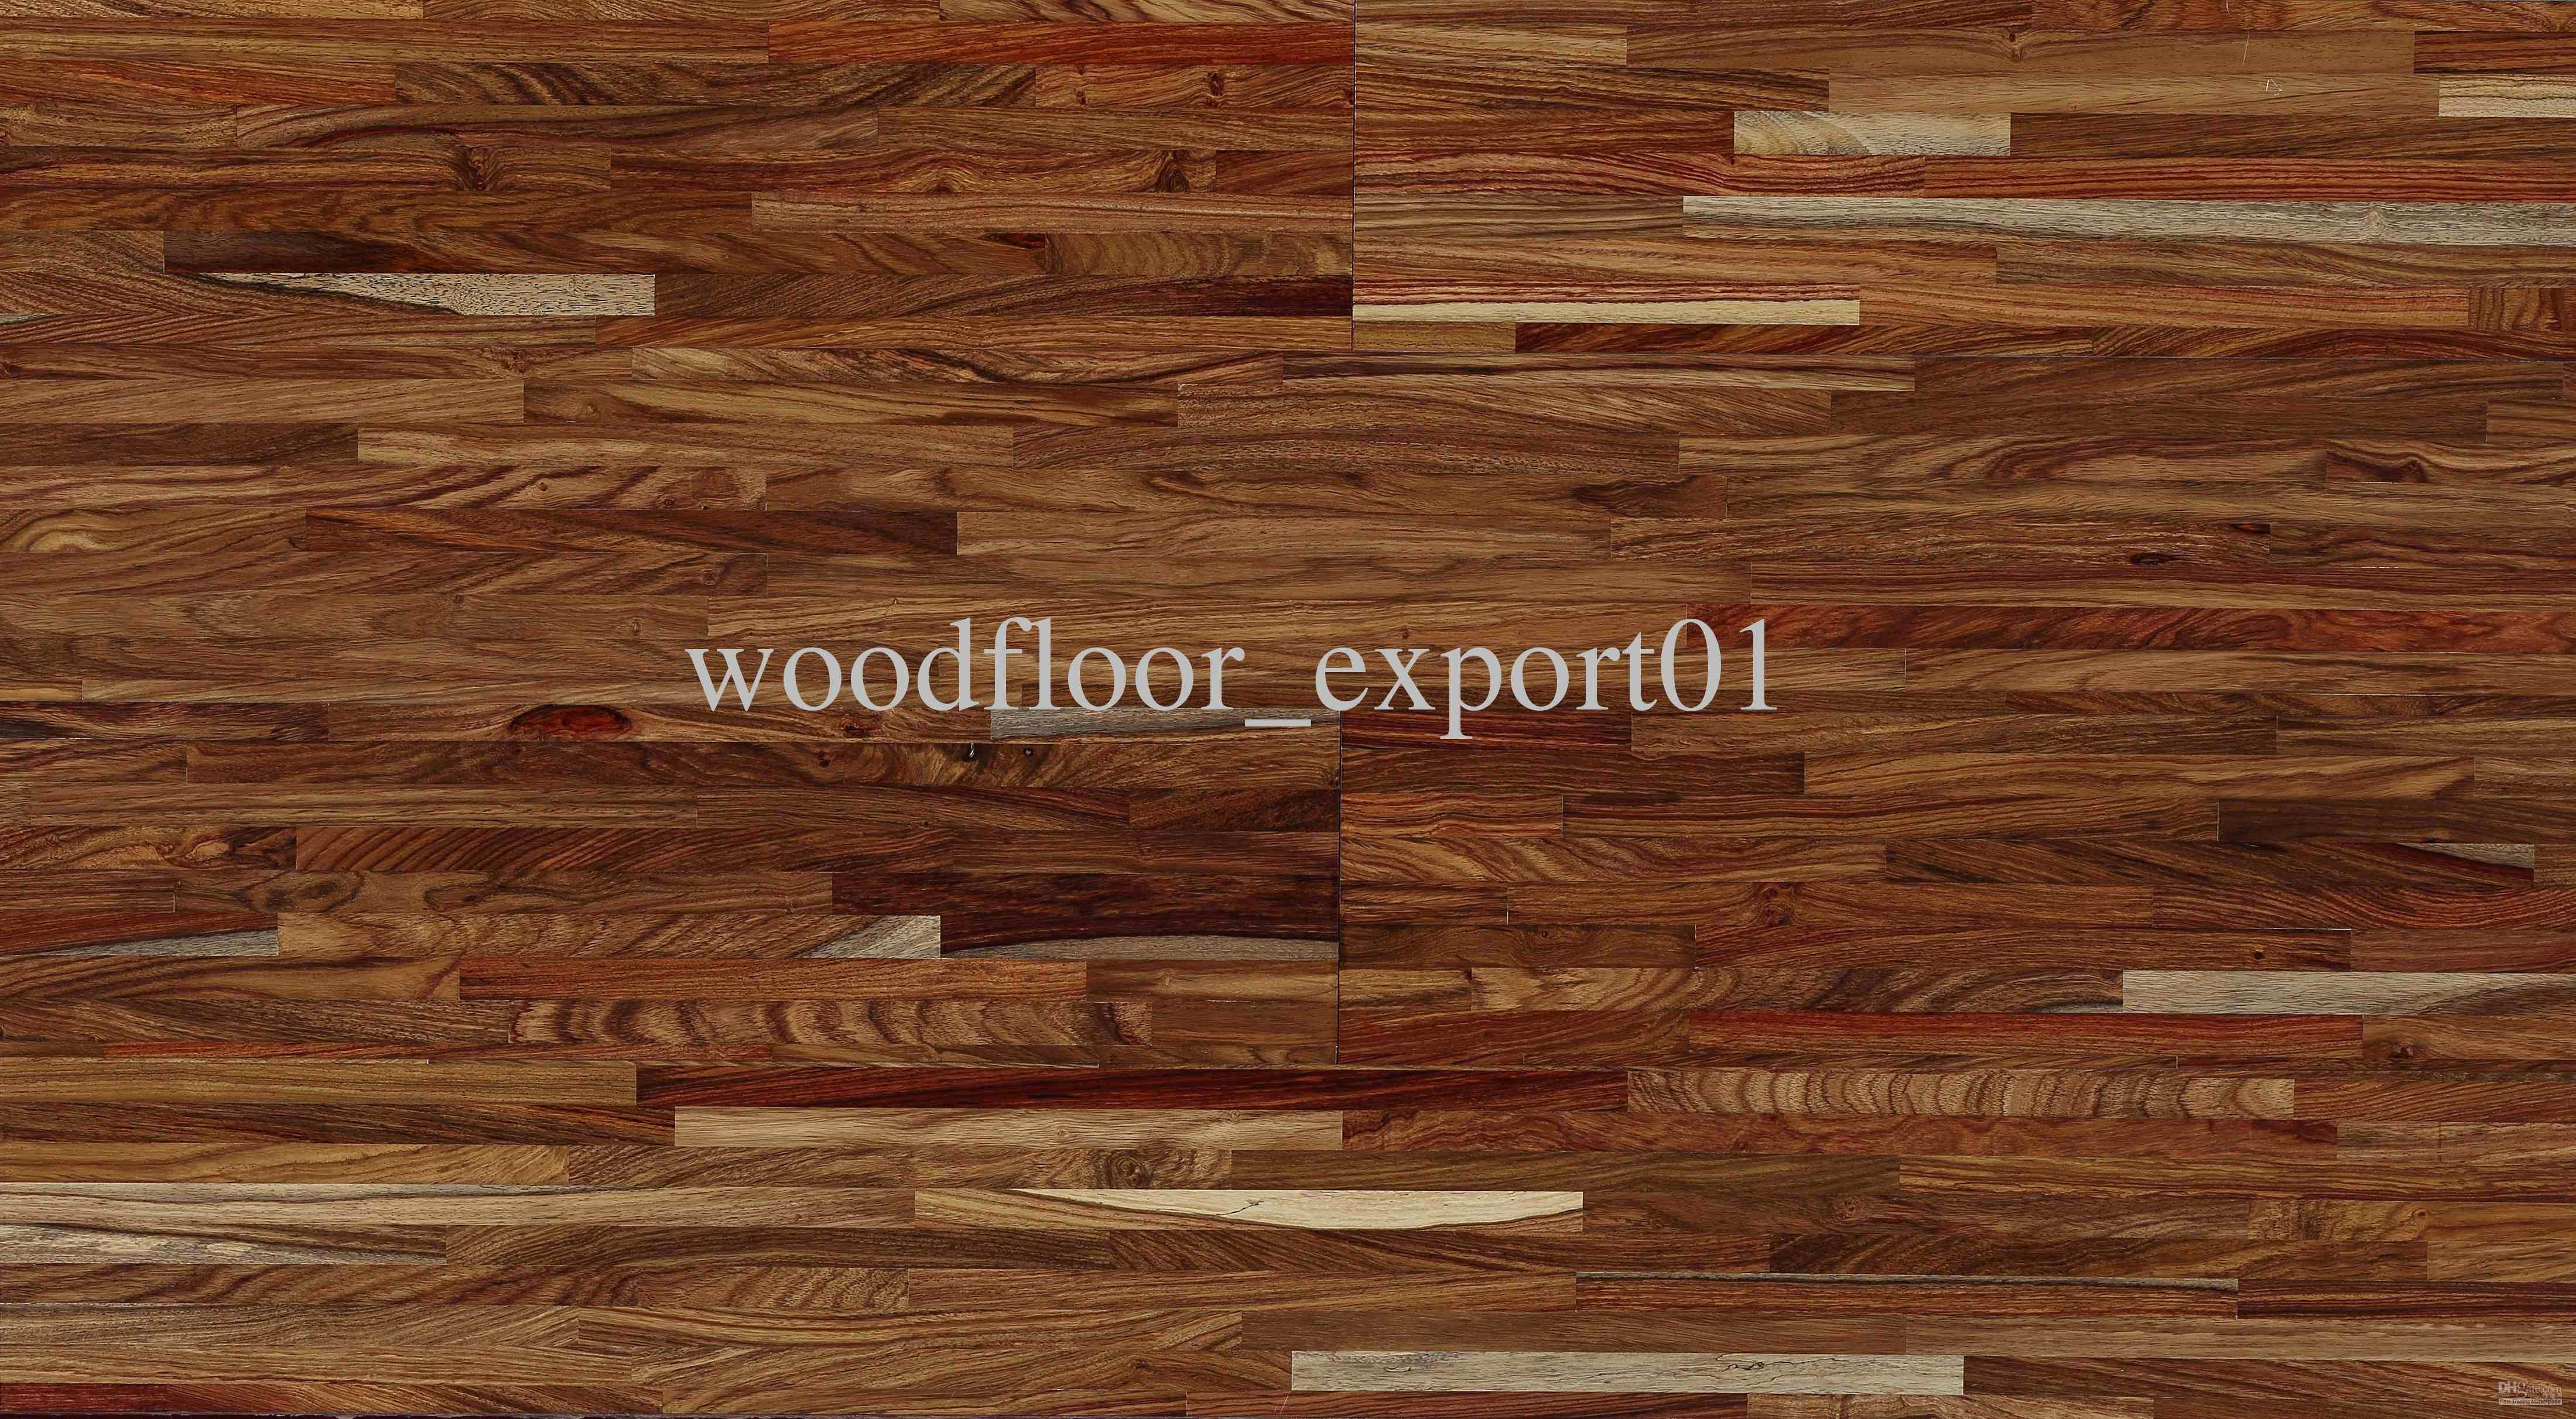 wax off hardwood floors of 15 unique types of hardwood flooring image dizpos com for types of hardwood flooring awesome 50 inspirational sanding and refinishing hardwood floors graphics image of 15